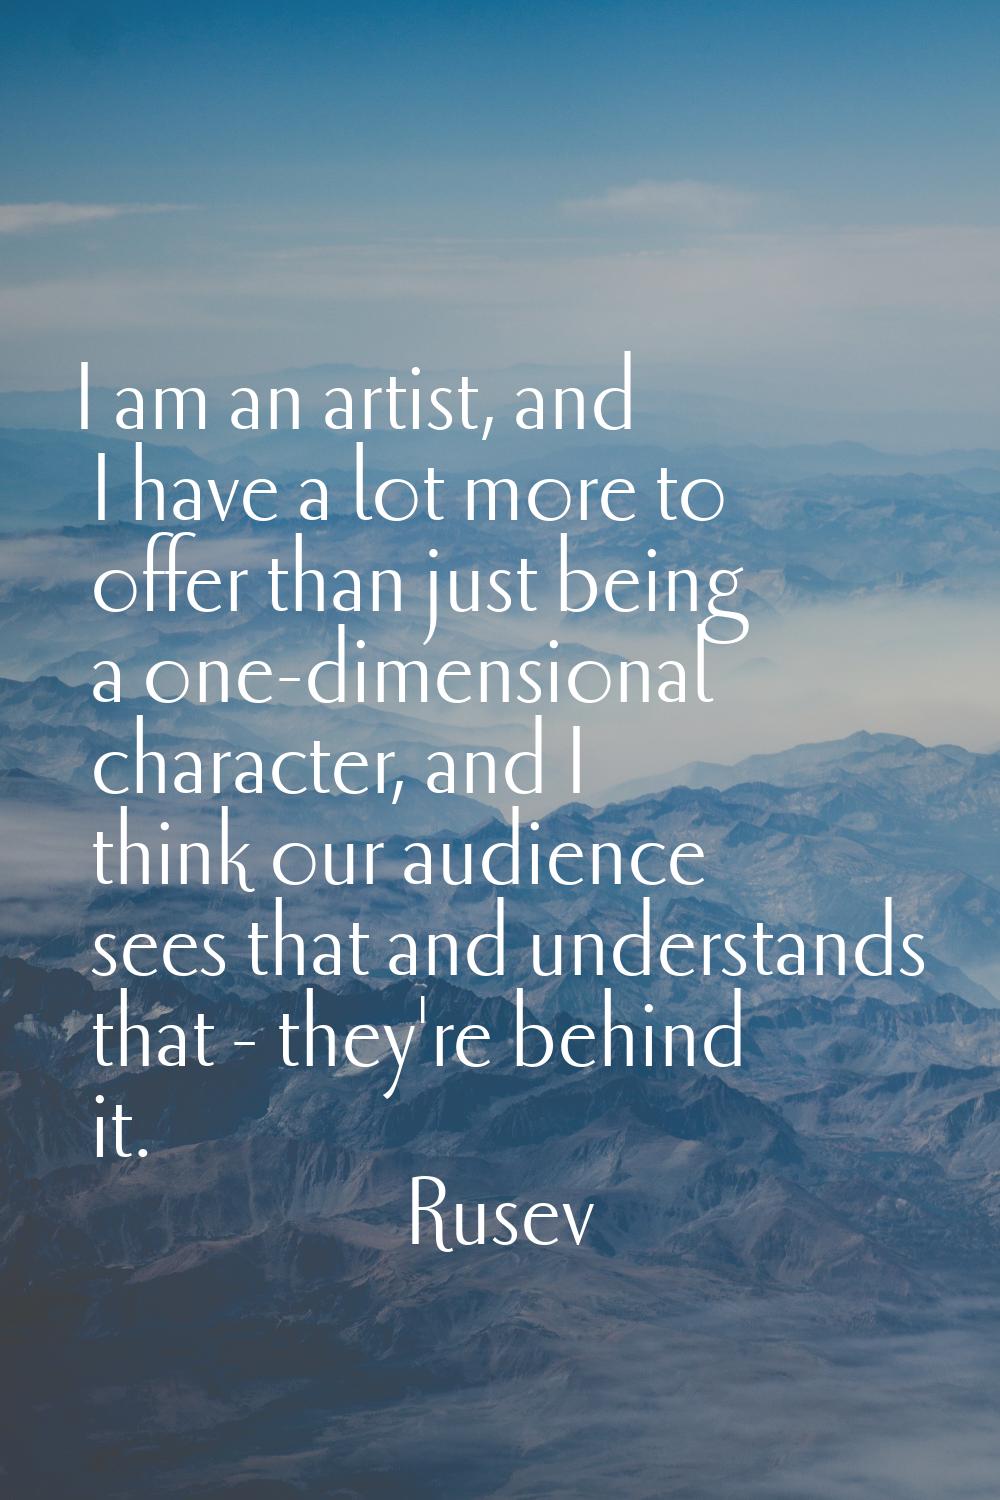 I am an artist, and I have a lot more to offer than just being a one-dimensional character, and I t